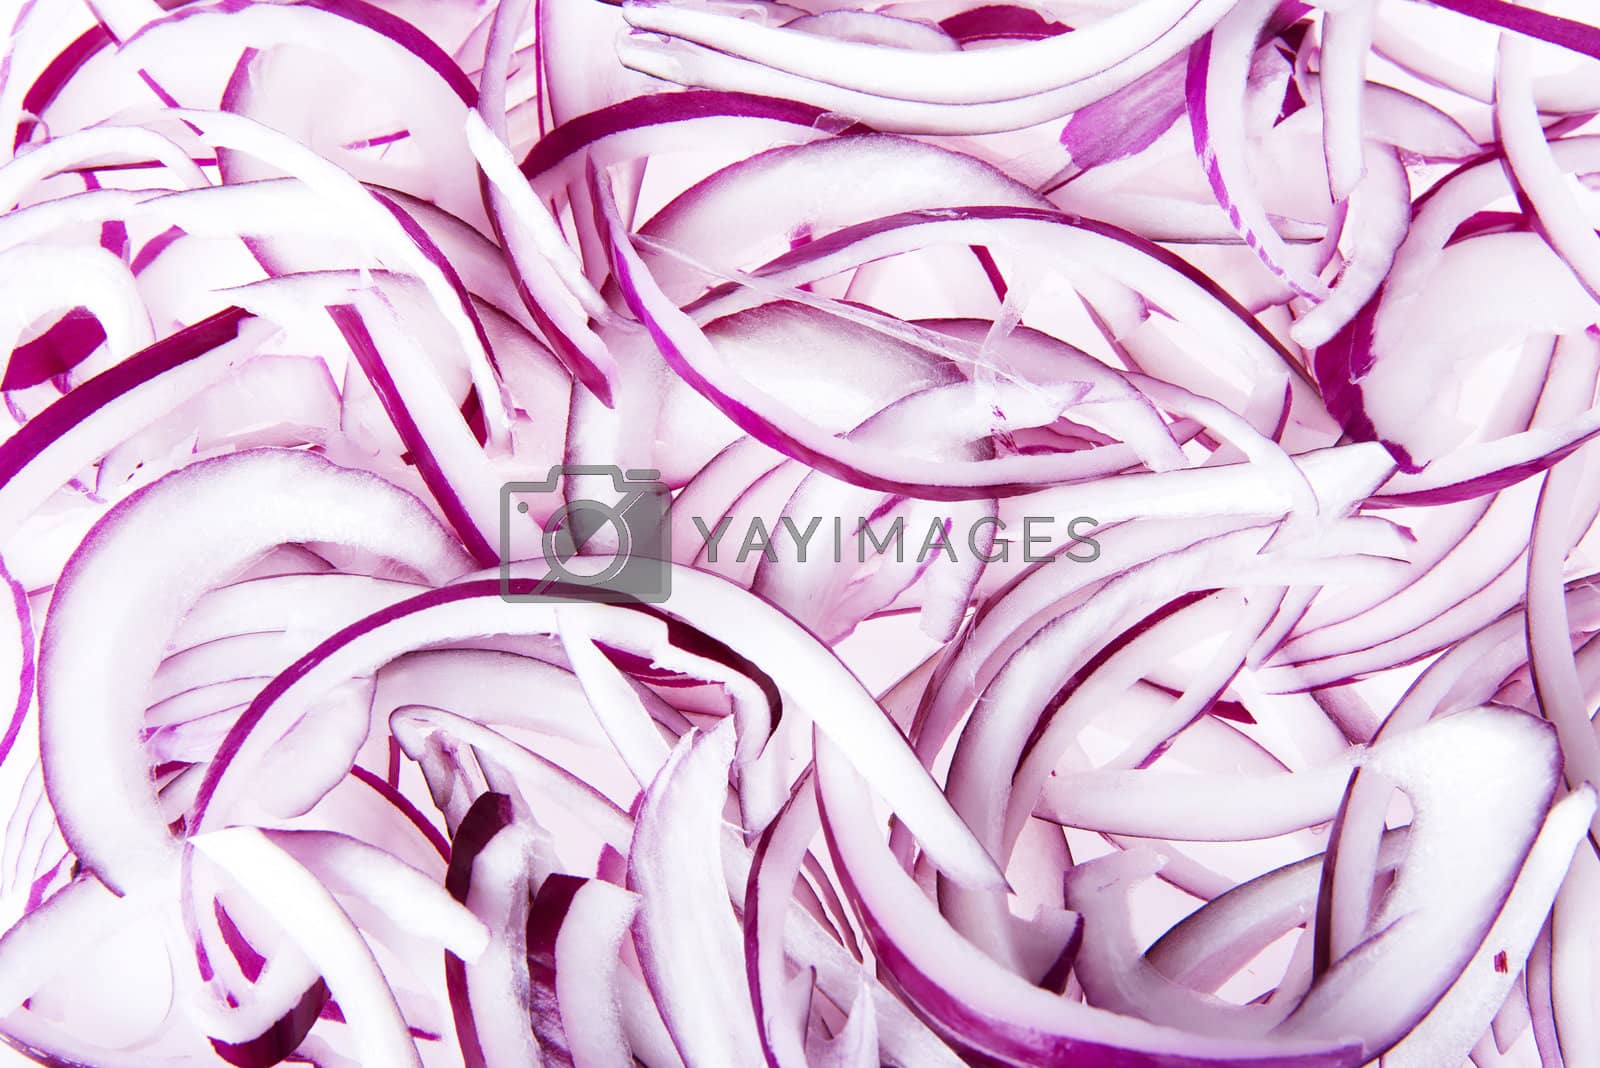 Royalty free image of Sliced red onion by BDS